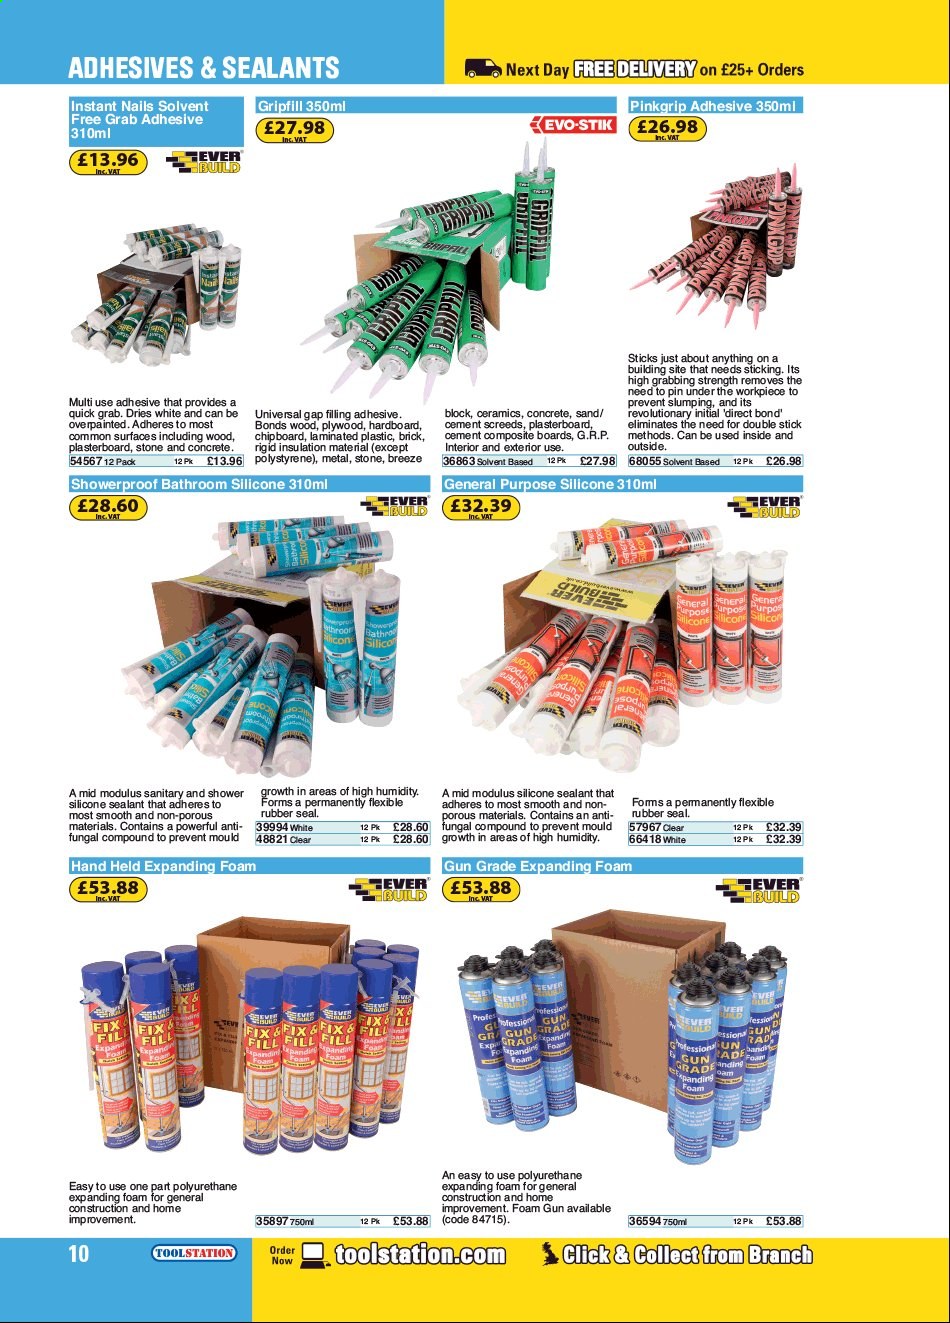 thumbnail - Toolstation offer  - Sales products - adhesive, silicone sealants, brick, plywood. Page 10.